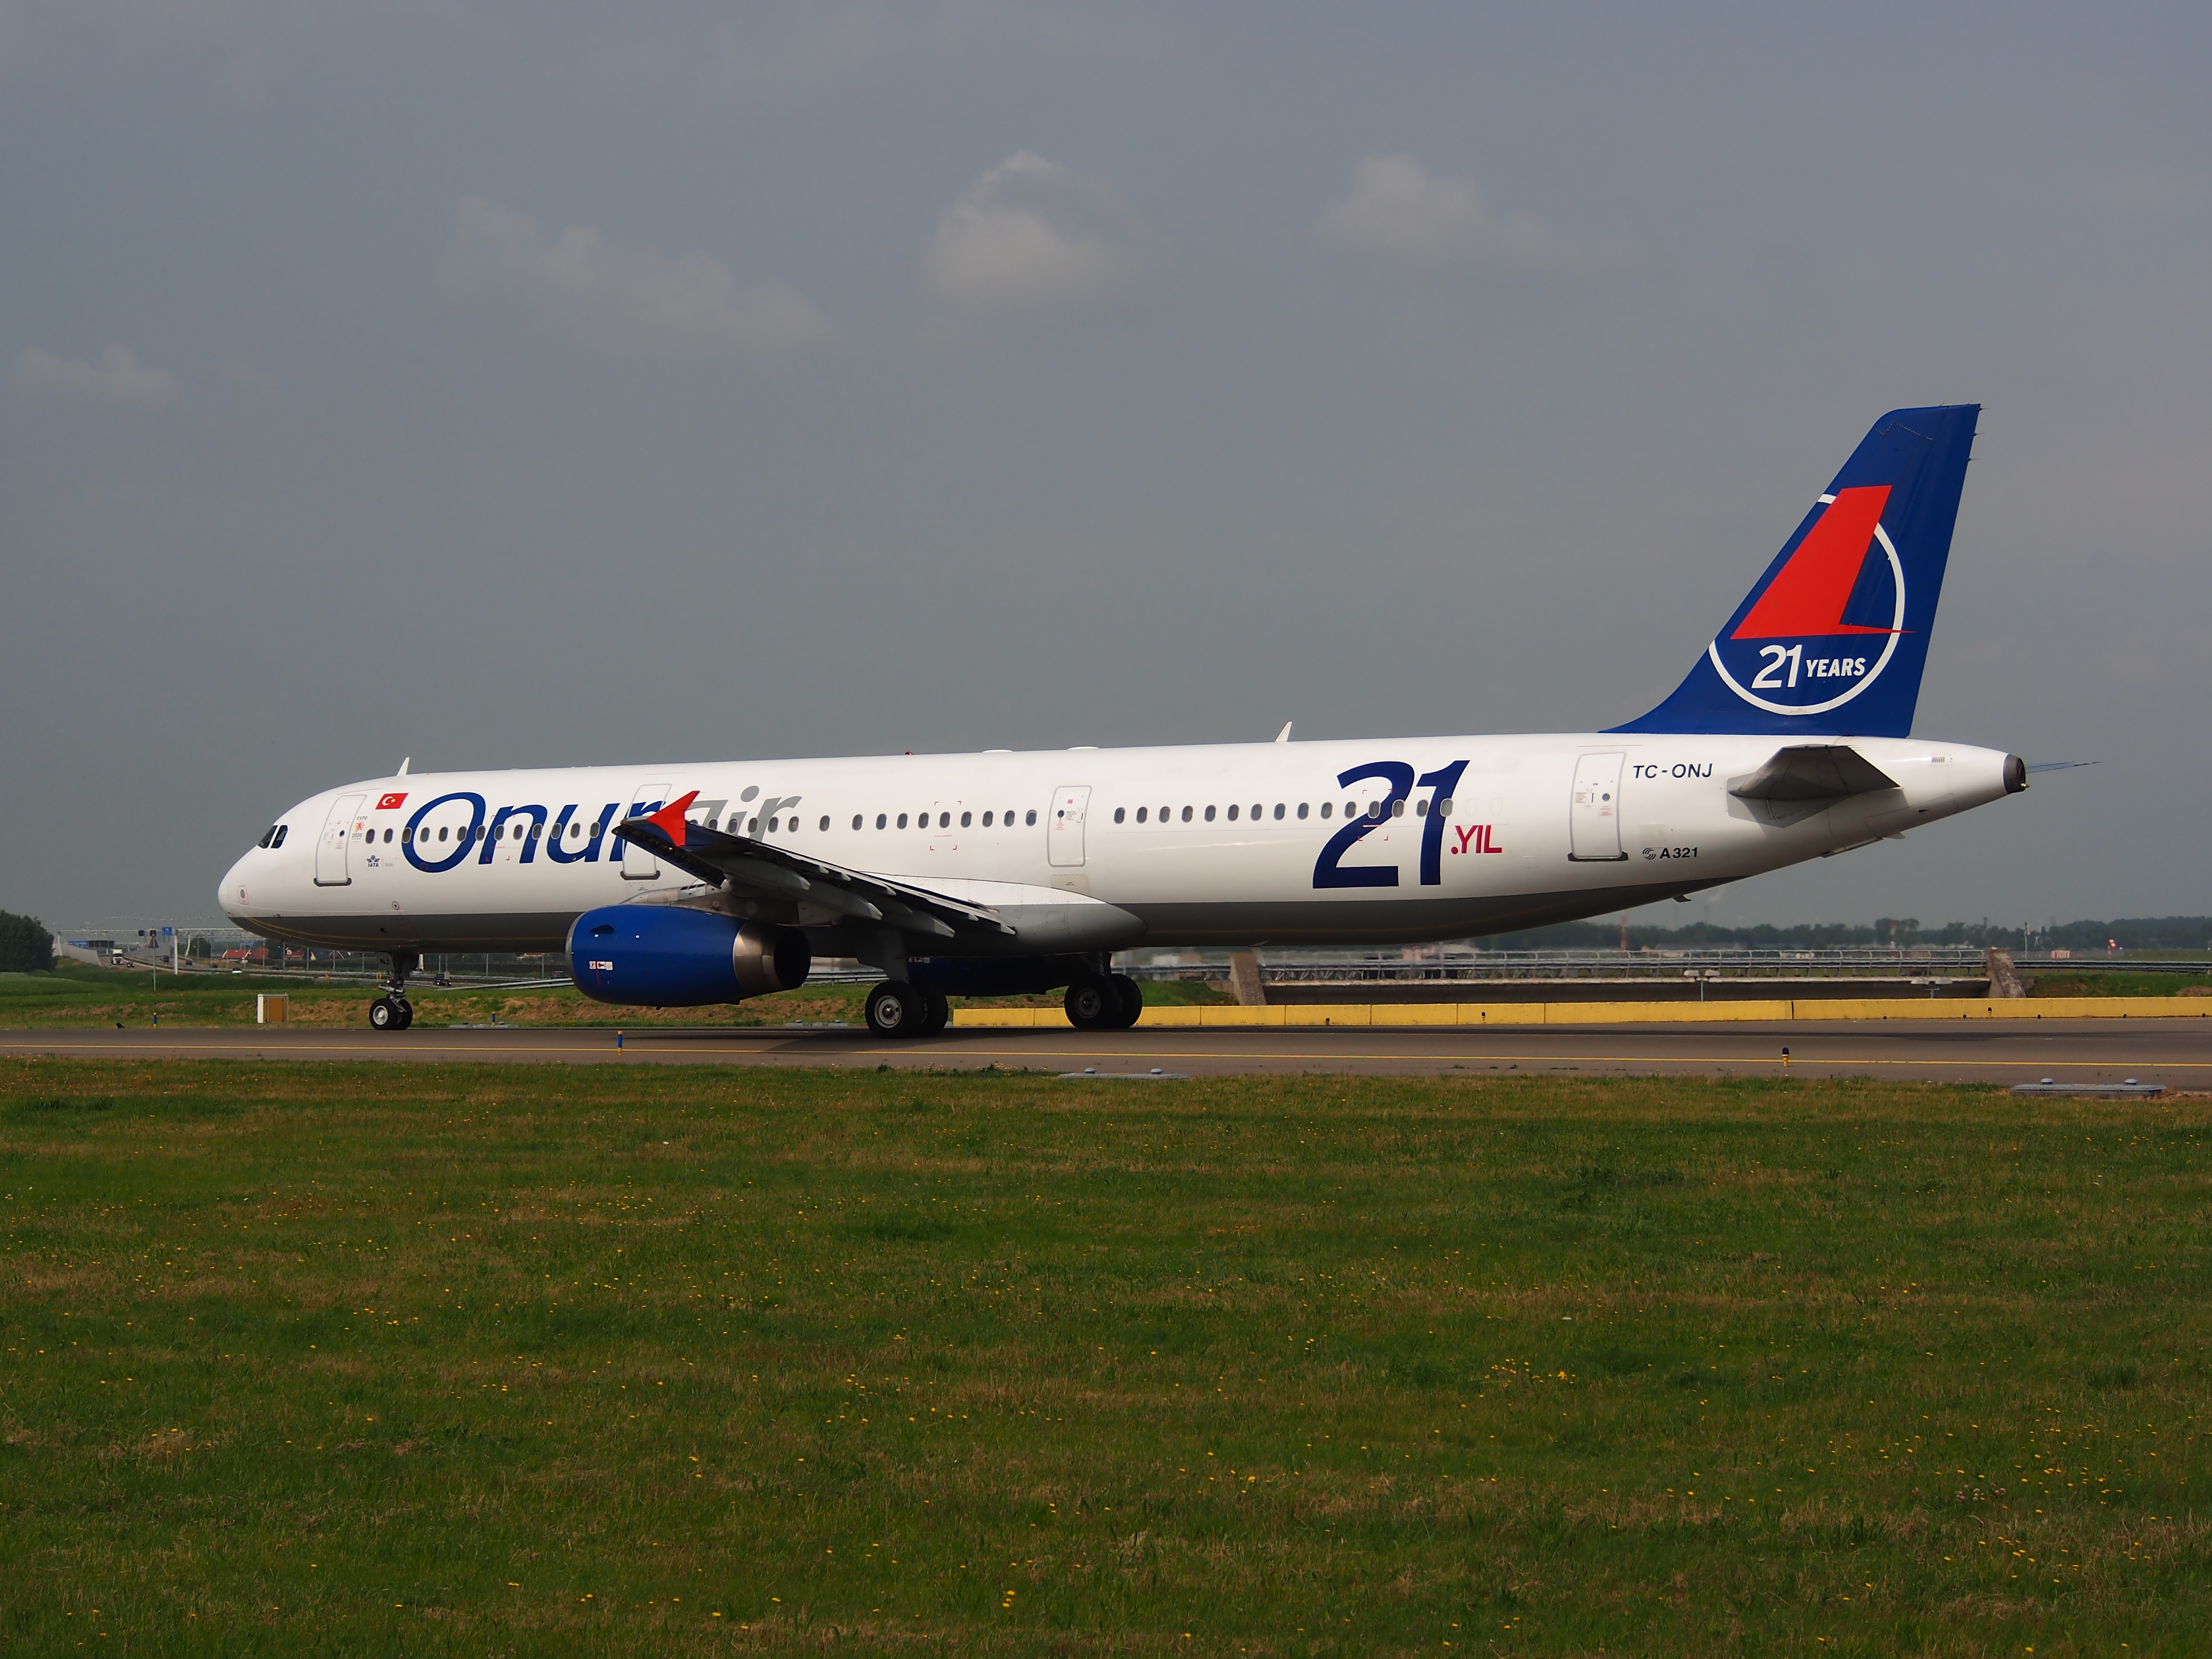 TC-ONJ Onur Air Airbus A321-131 - cn 385 taxiing 14july2013 pic-005